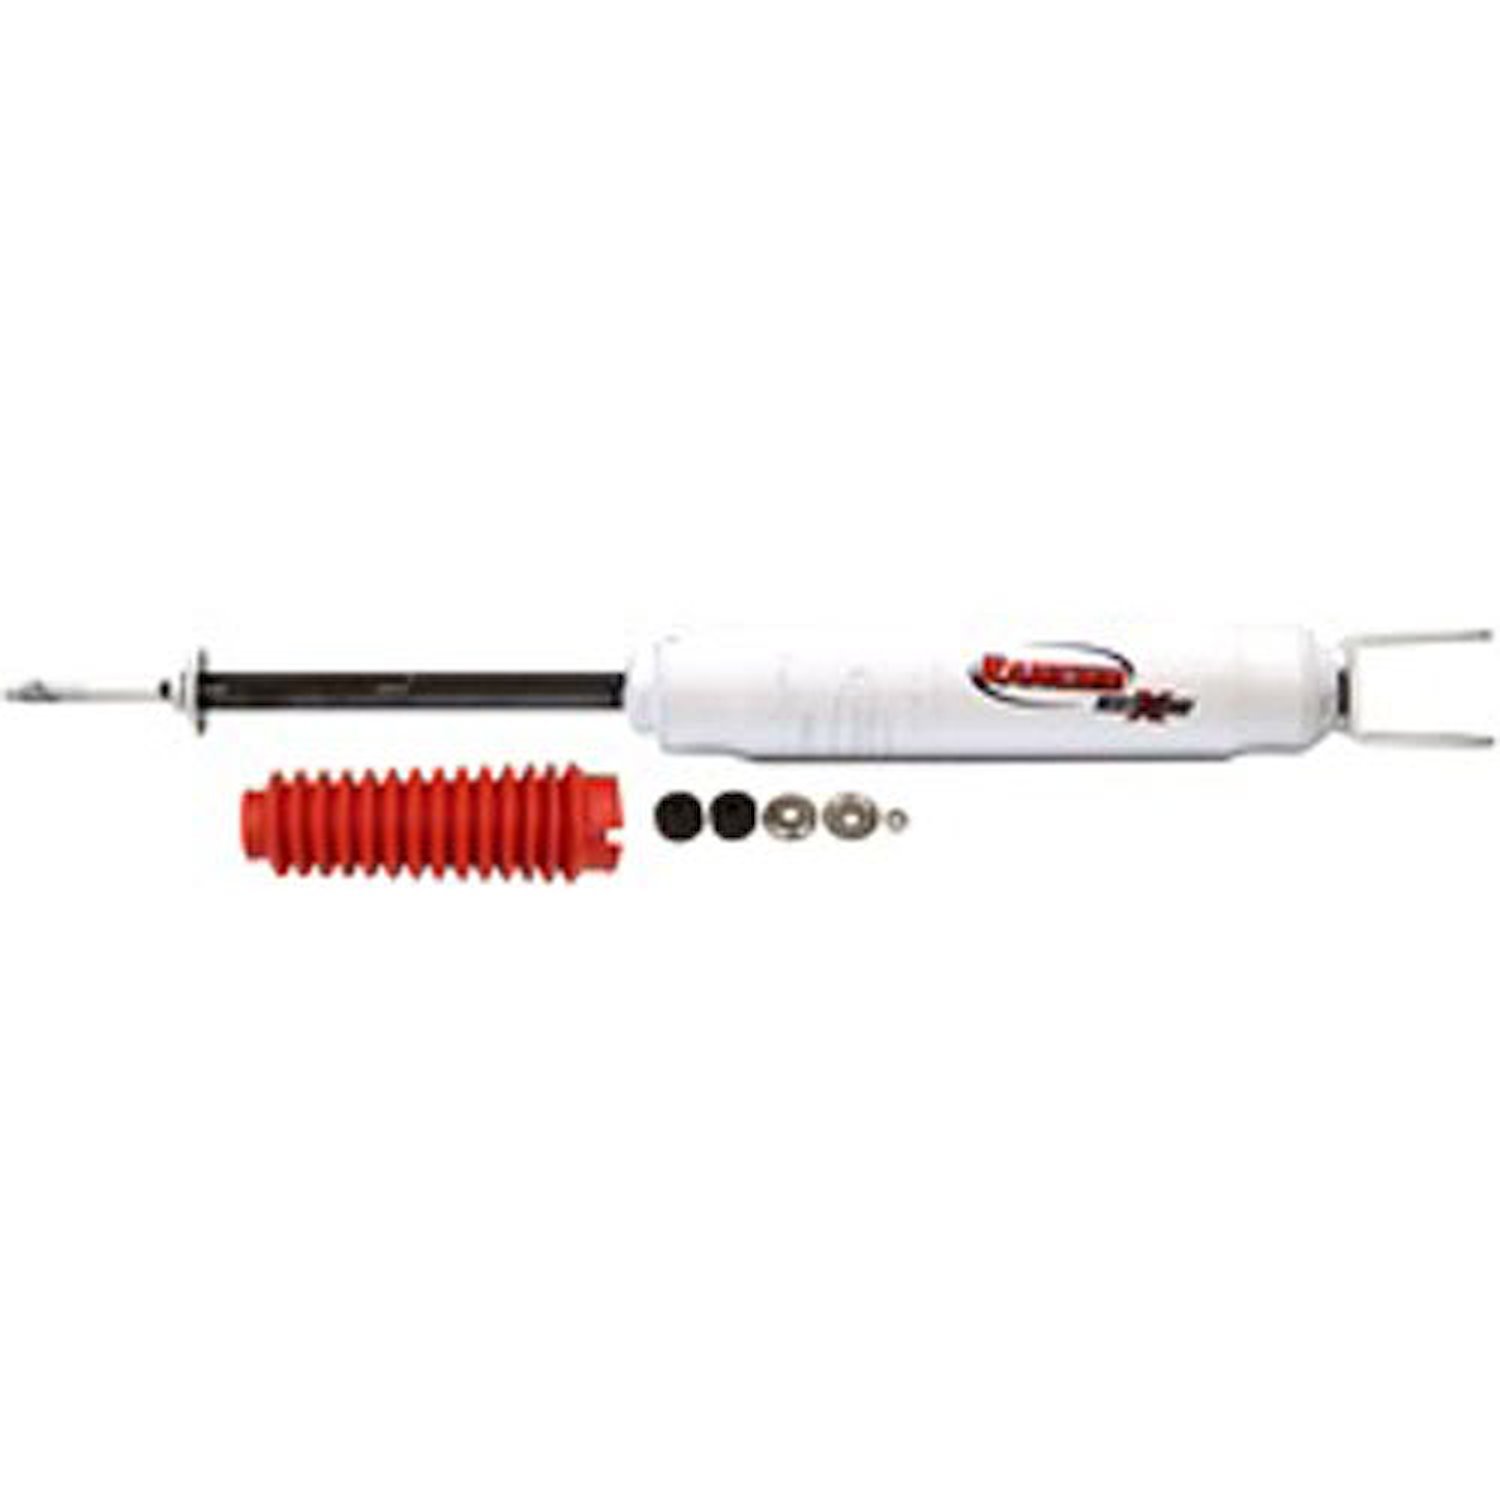 RS5000X Front Shock Absorber Fits Chevy Avalanche, GM 1500 Pickups and SUVs